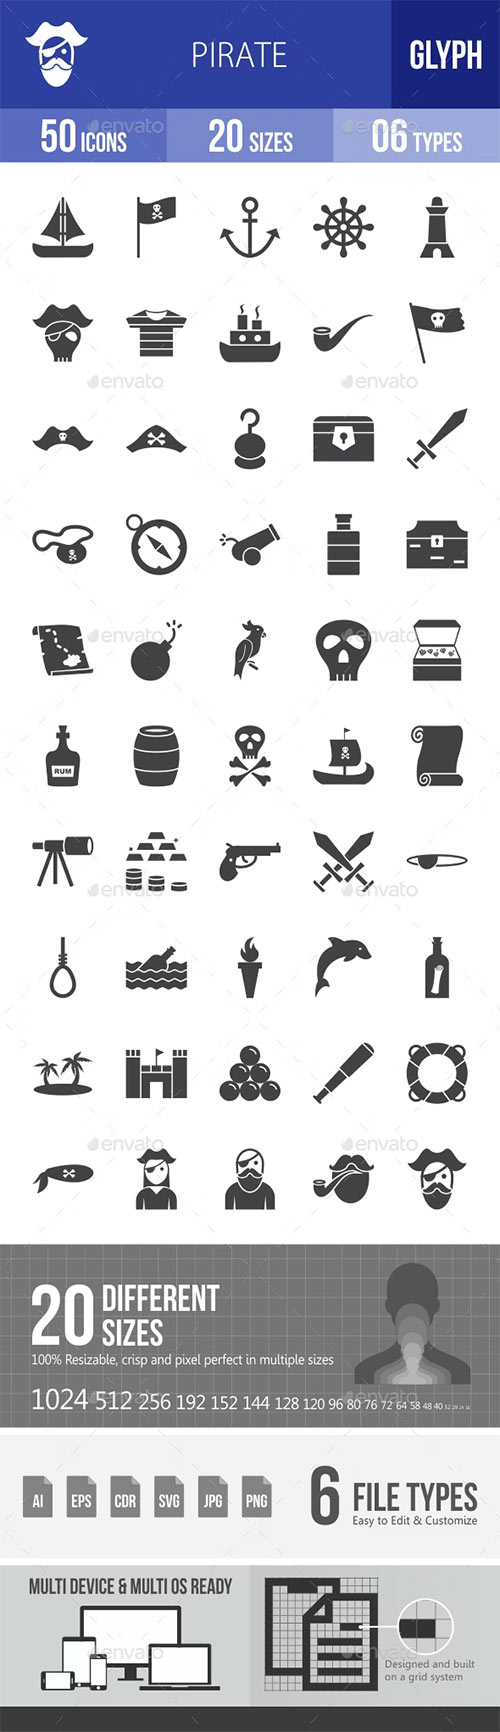 Pirate Glyph Icons 19407583